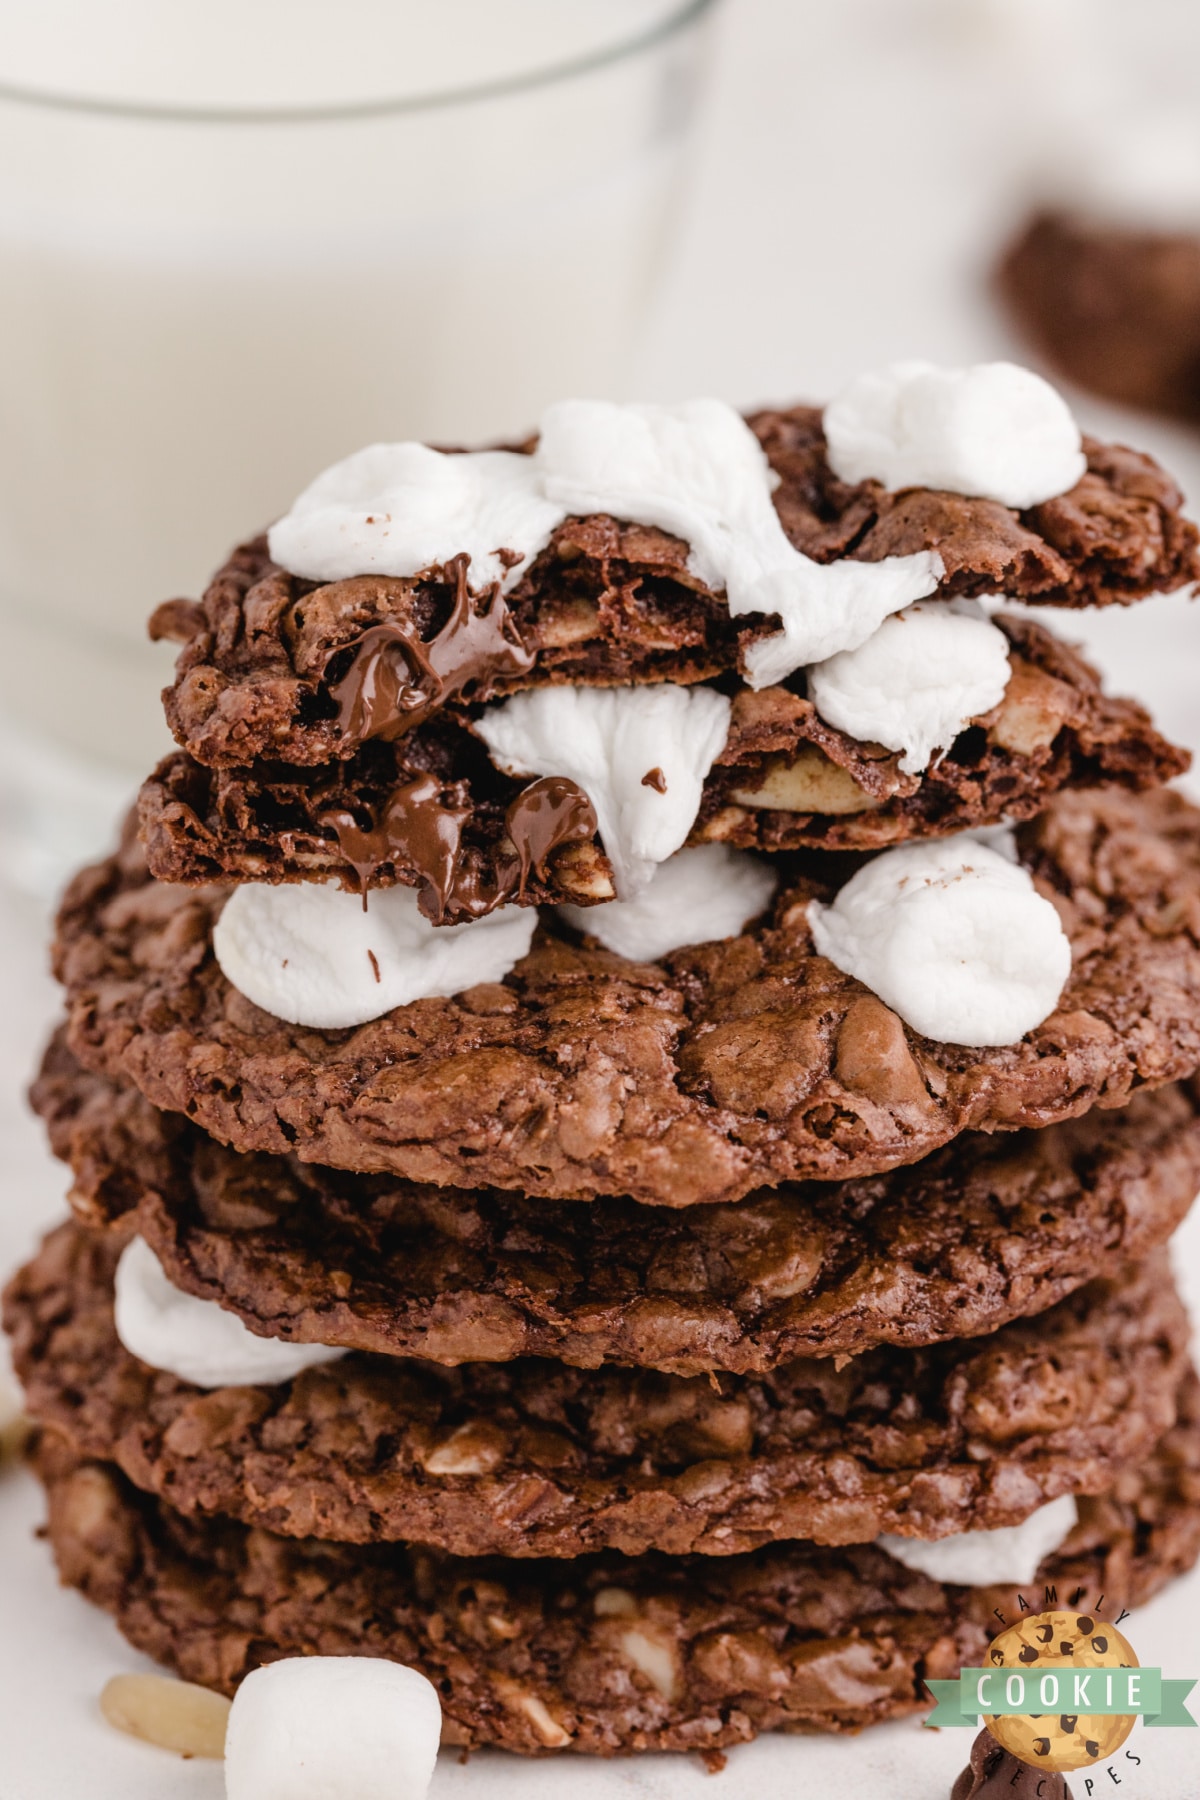 Chocolate cookies with almonds and marshmallows